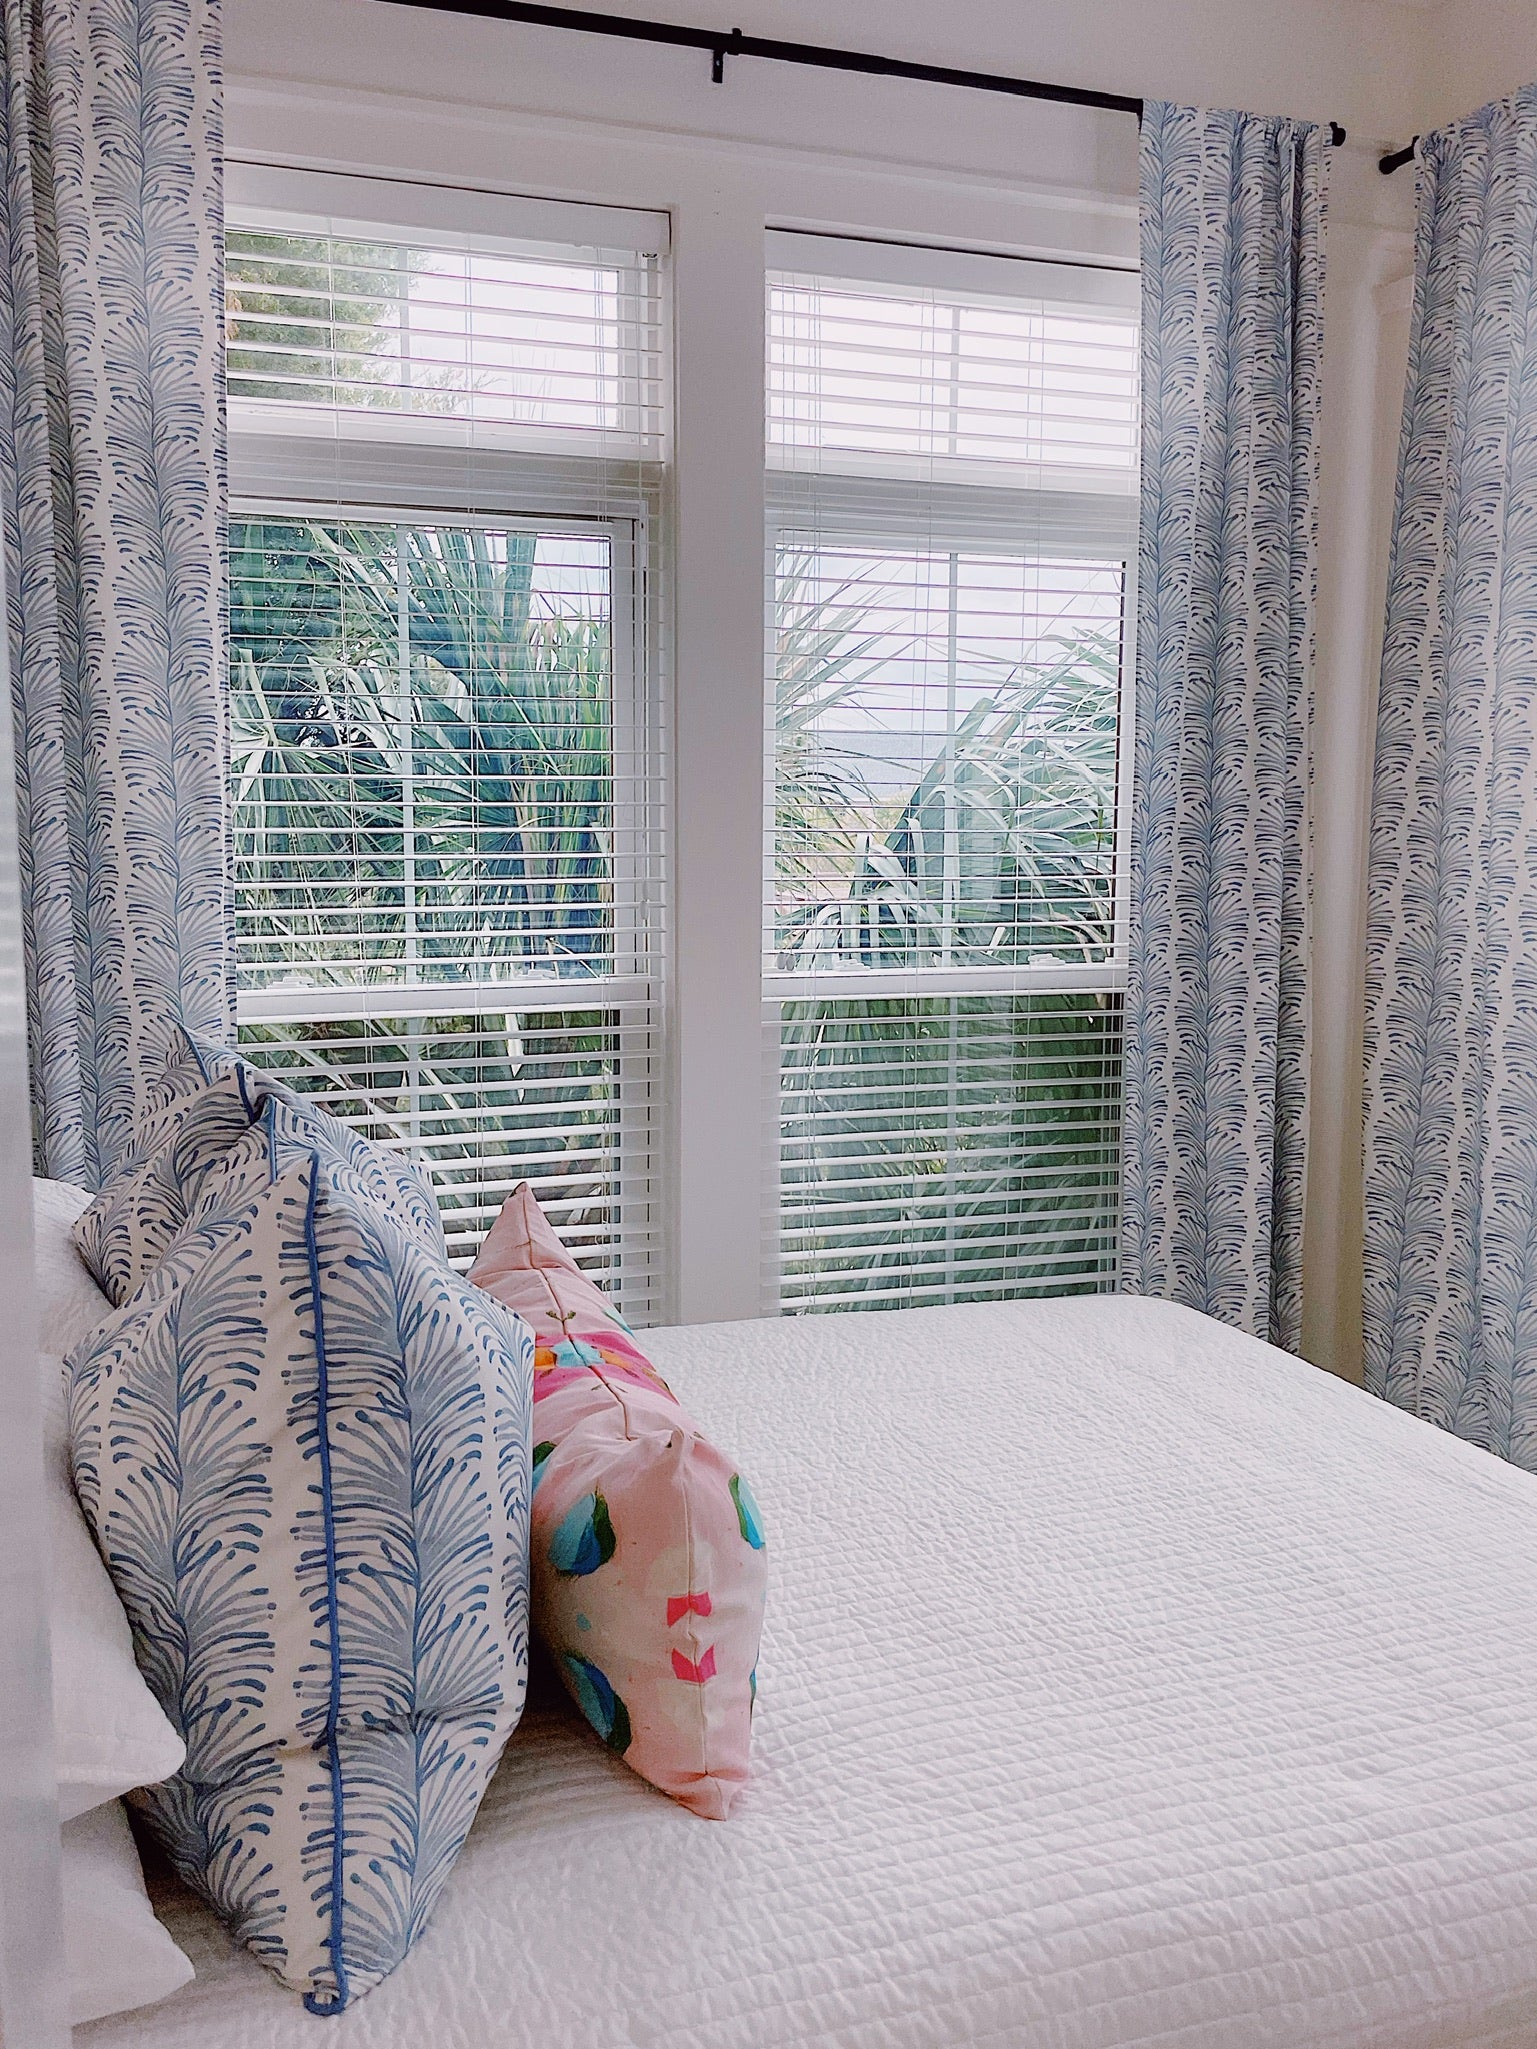 Sky blue botanical curtains hanging on a rod in front of a window in a bedroom with a white bed and sky blue botanical pillows